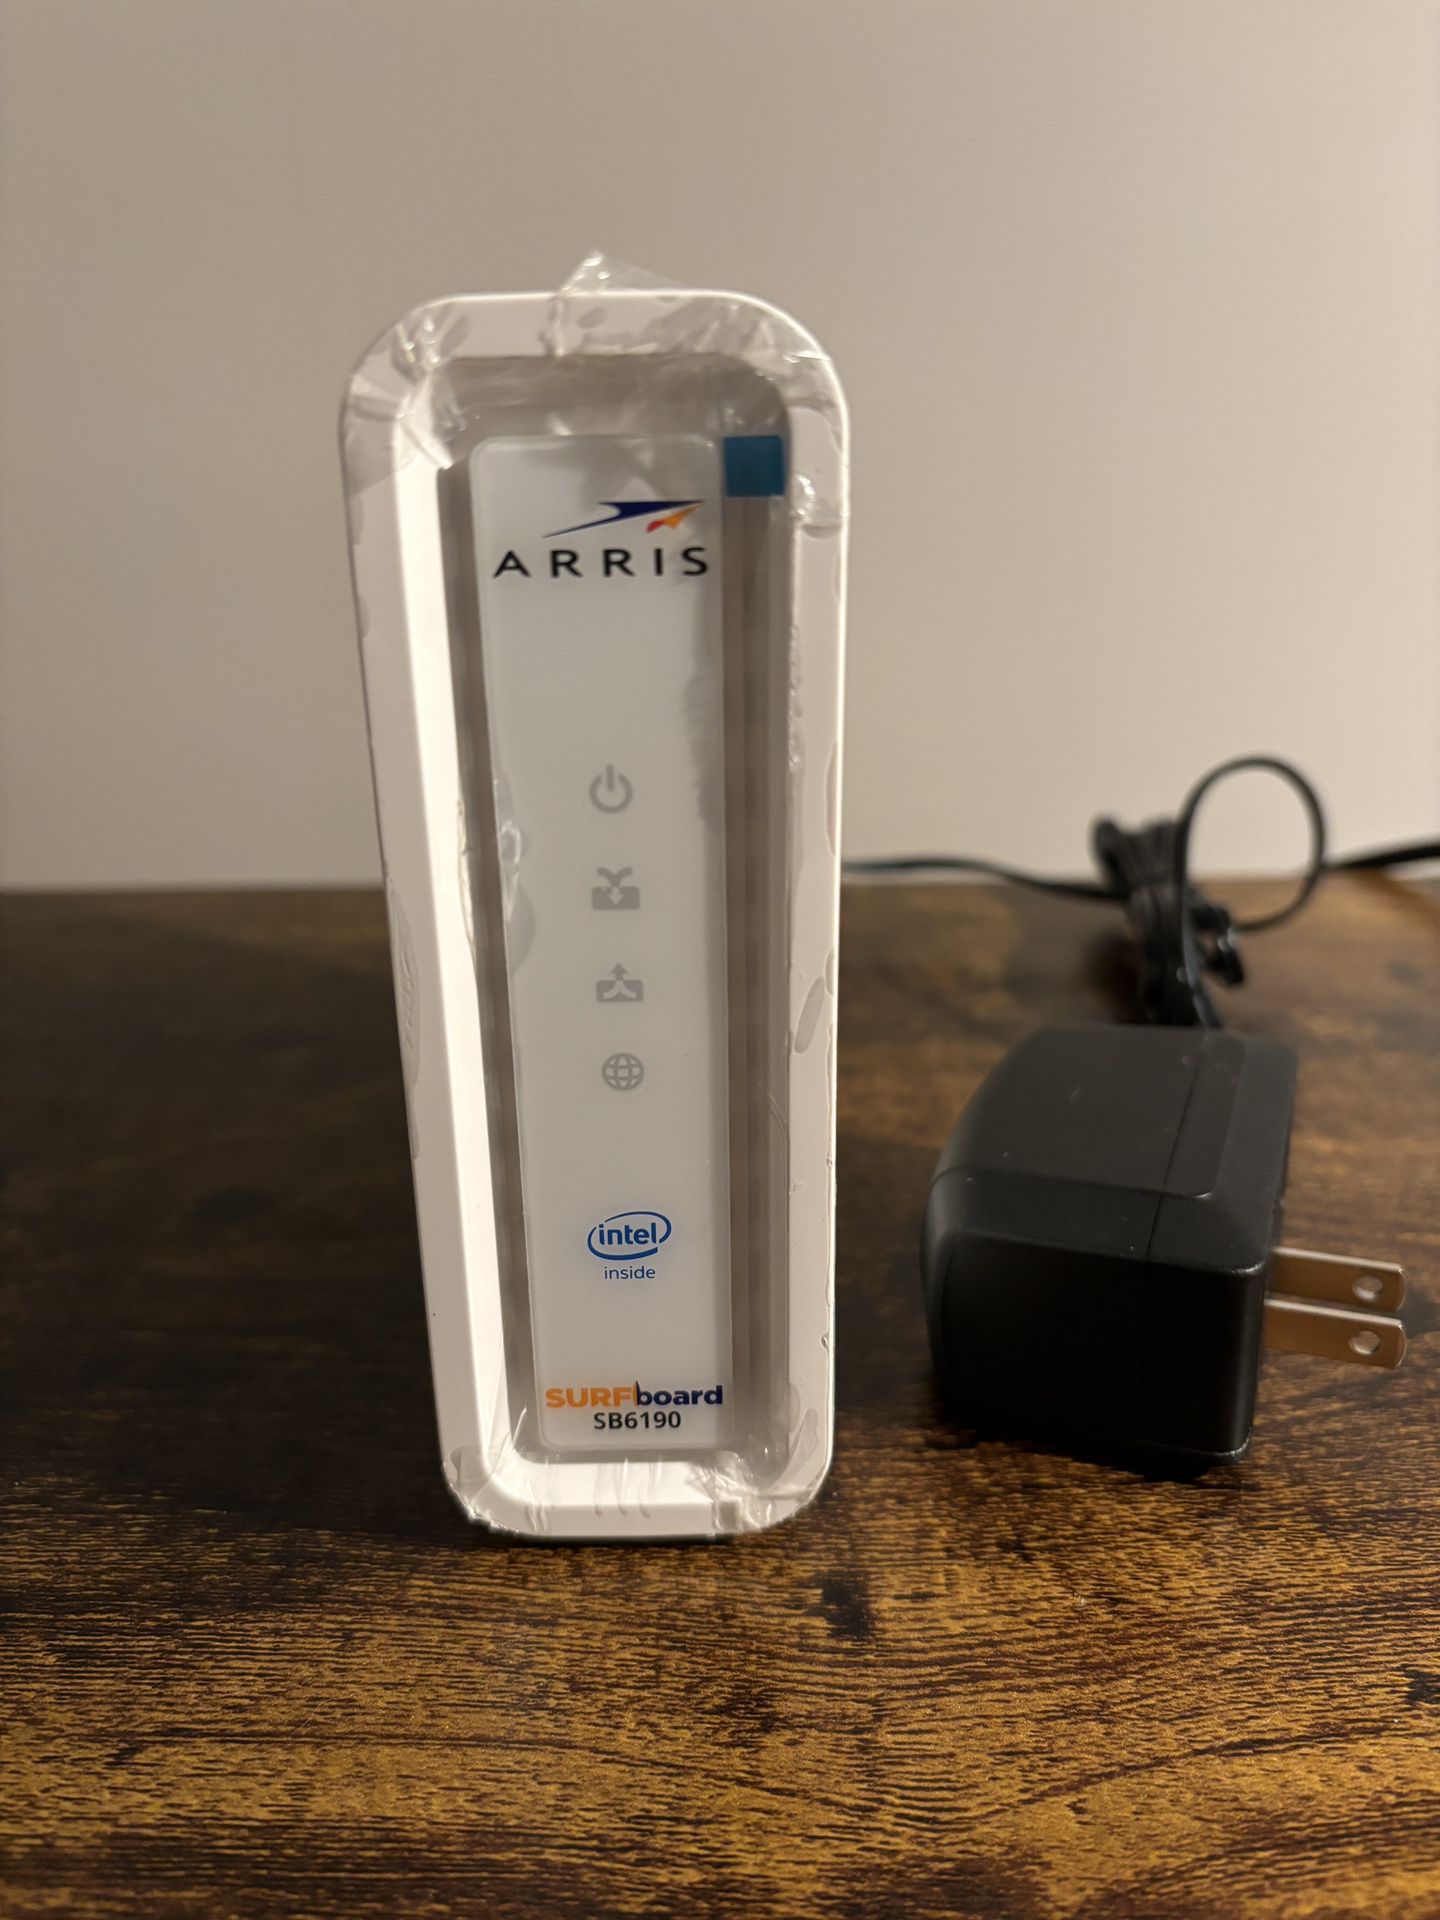 ARRIS SURFBOARD SB6190 MODEM WITH POWER CABLE